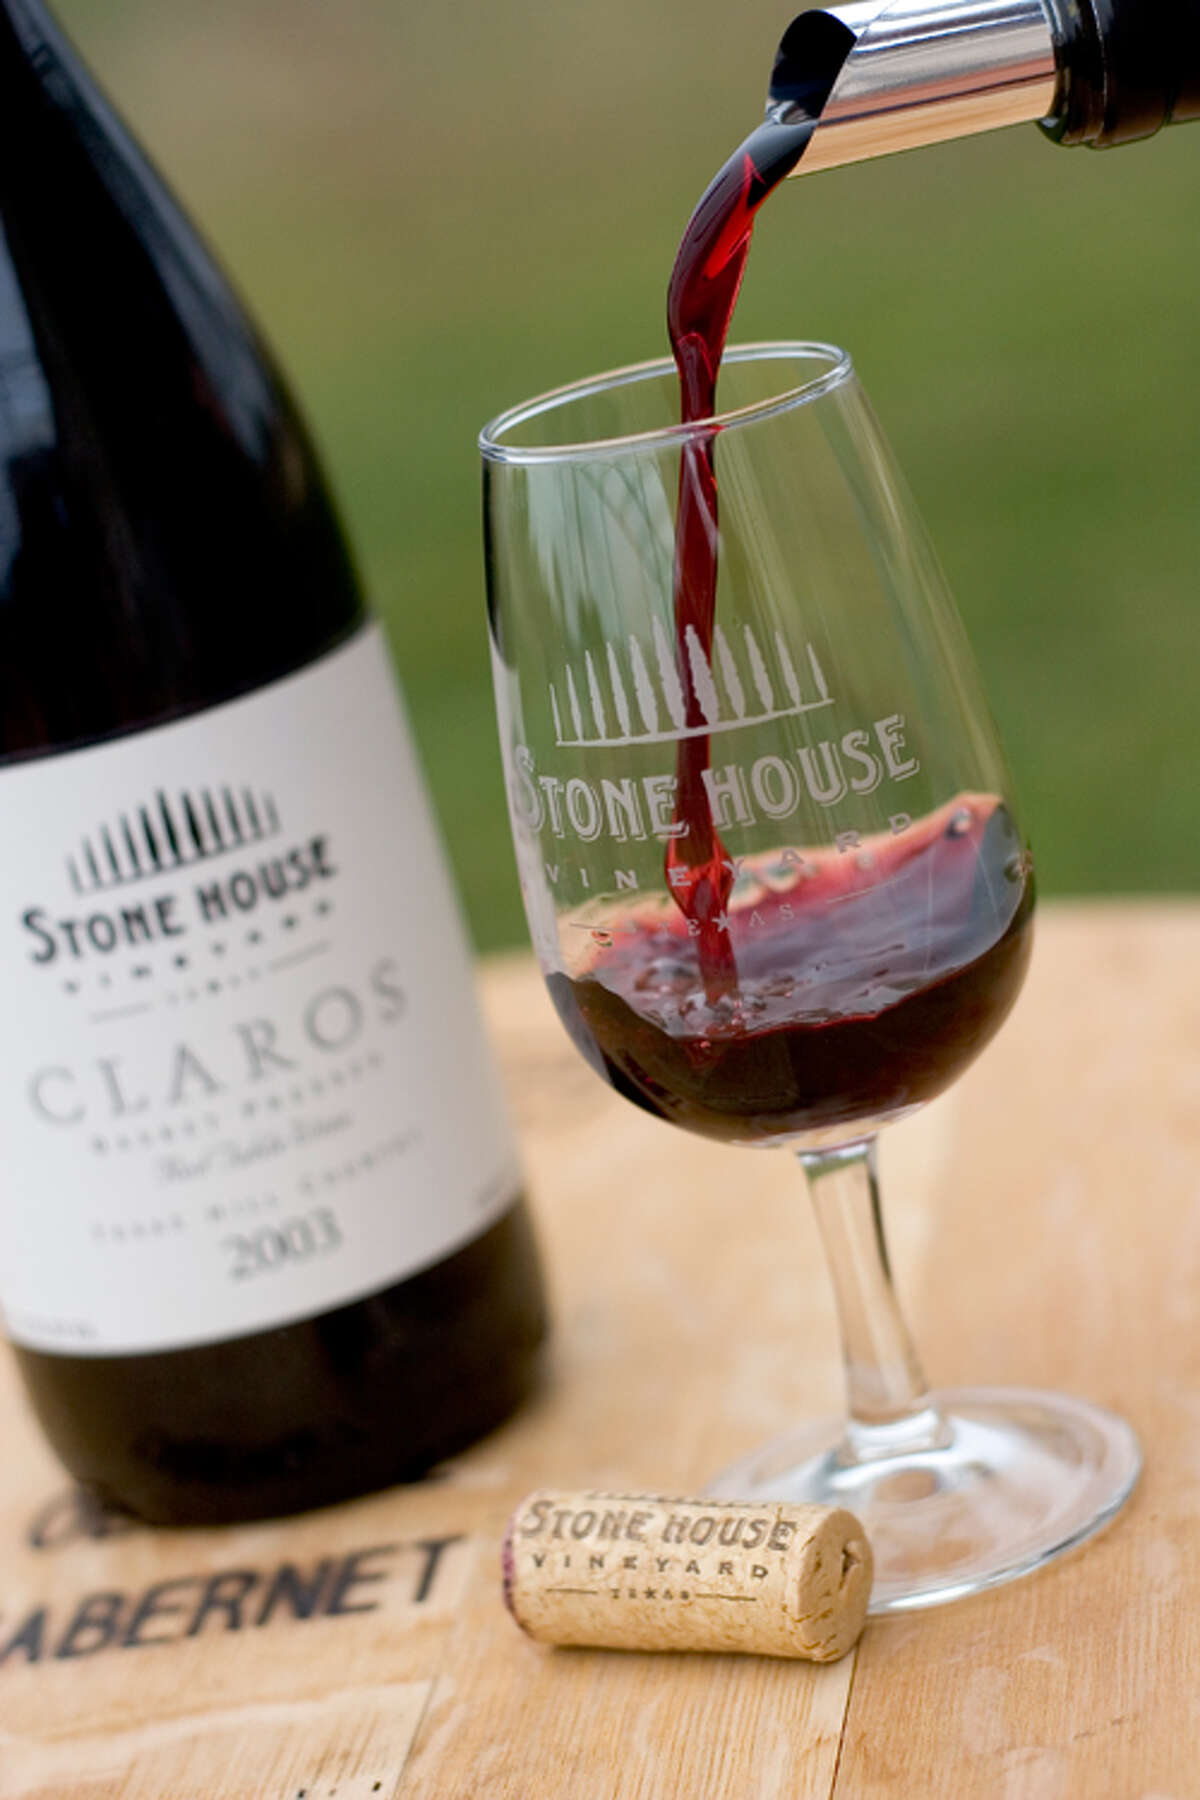 Claros, one of the signature wines of Stone House Vineyard